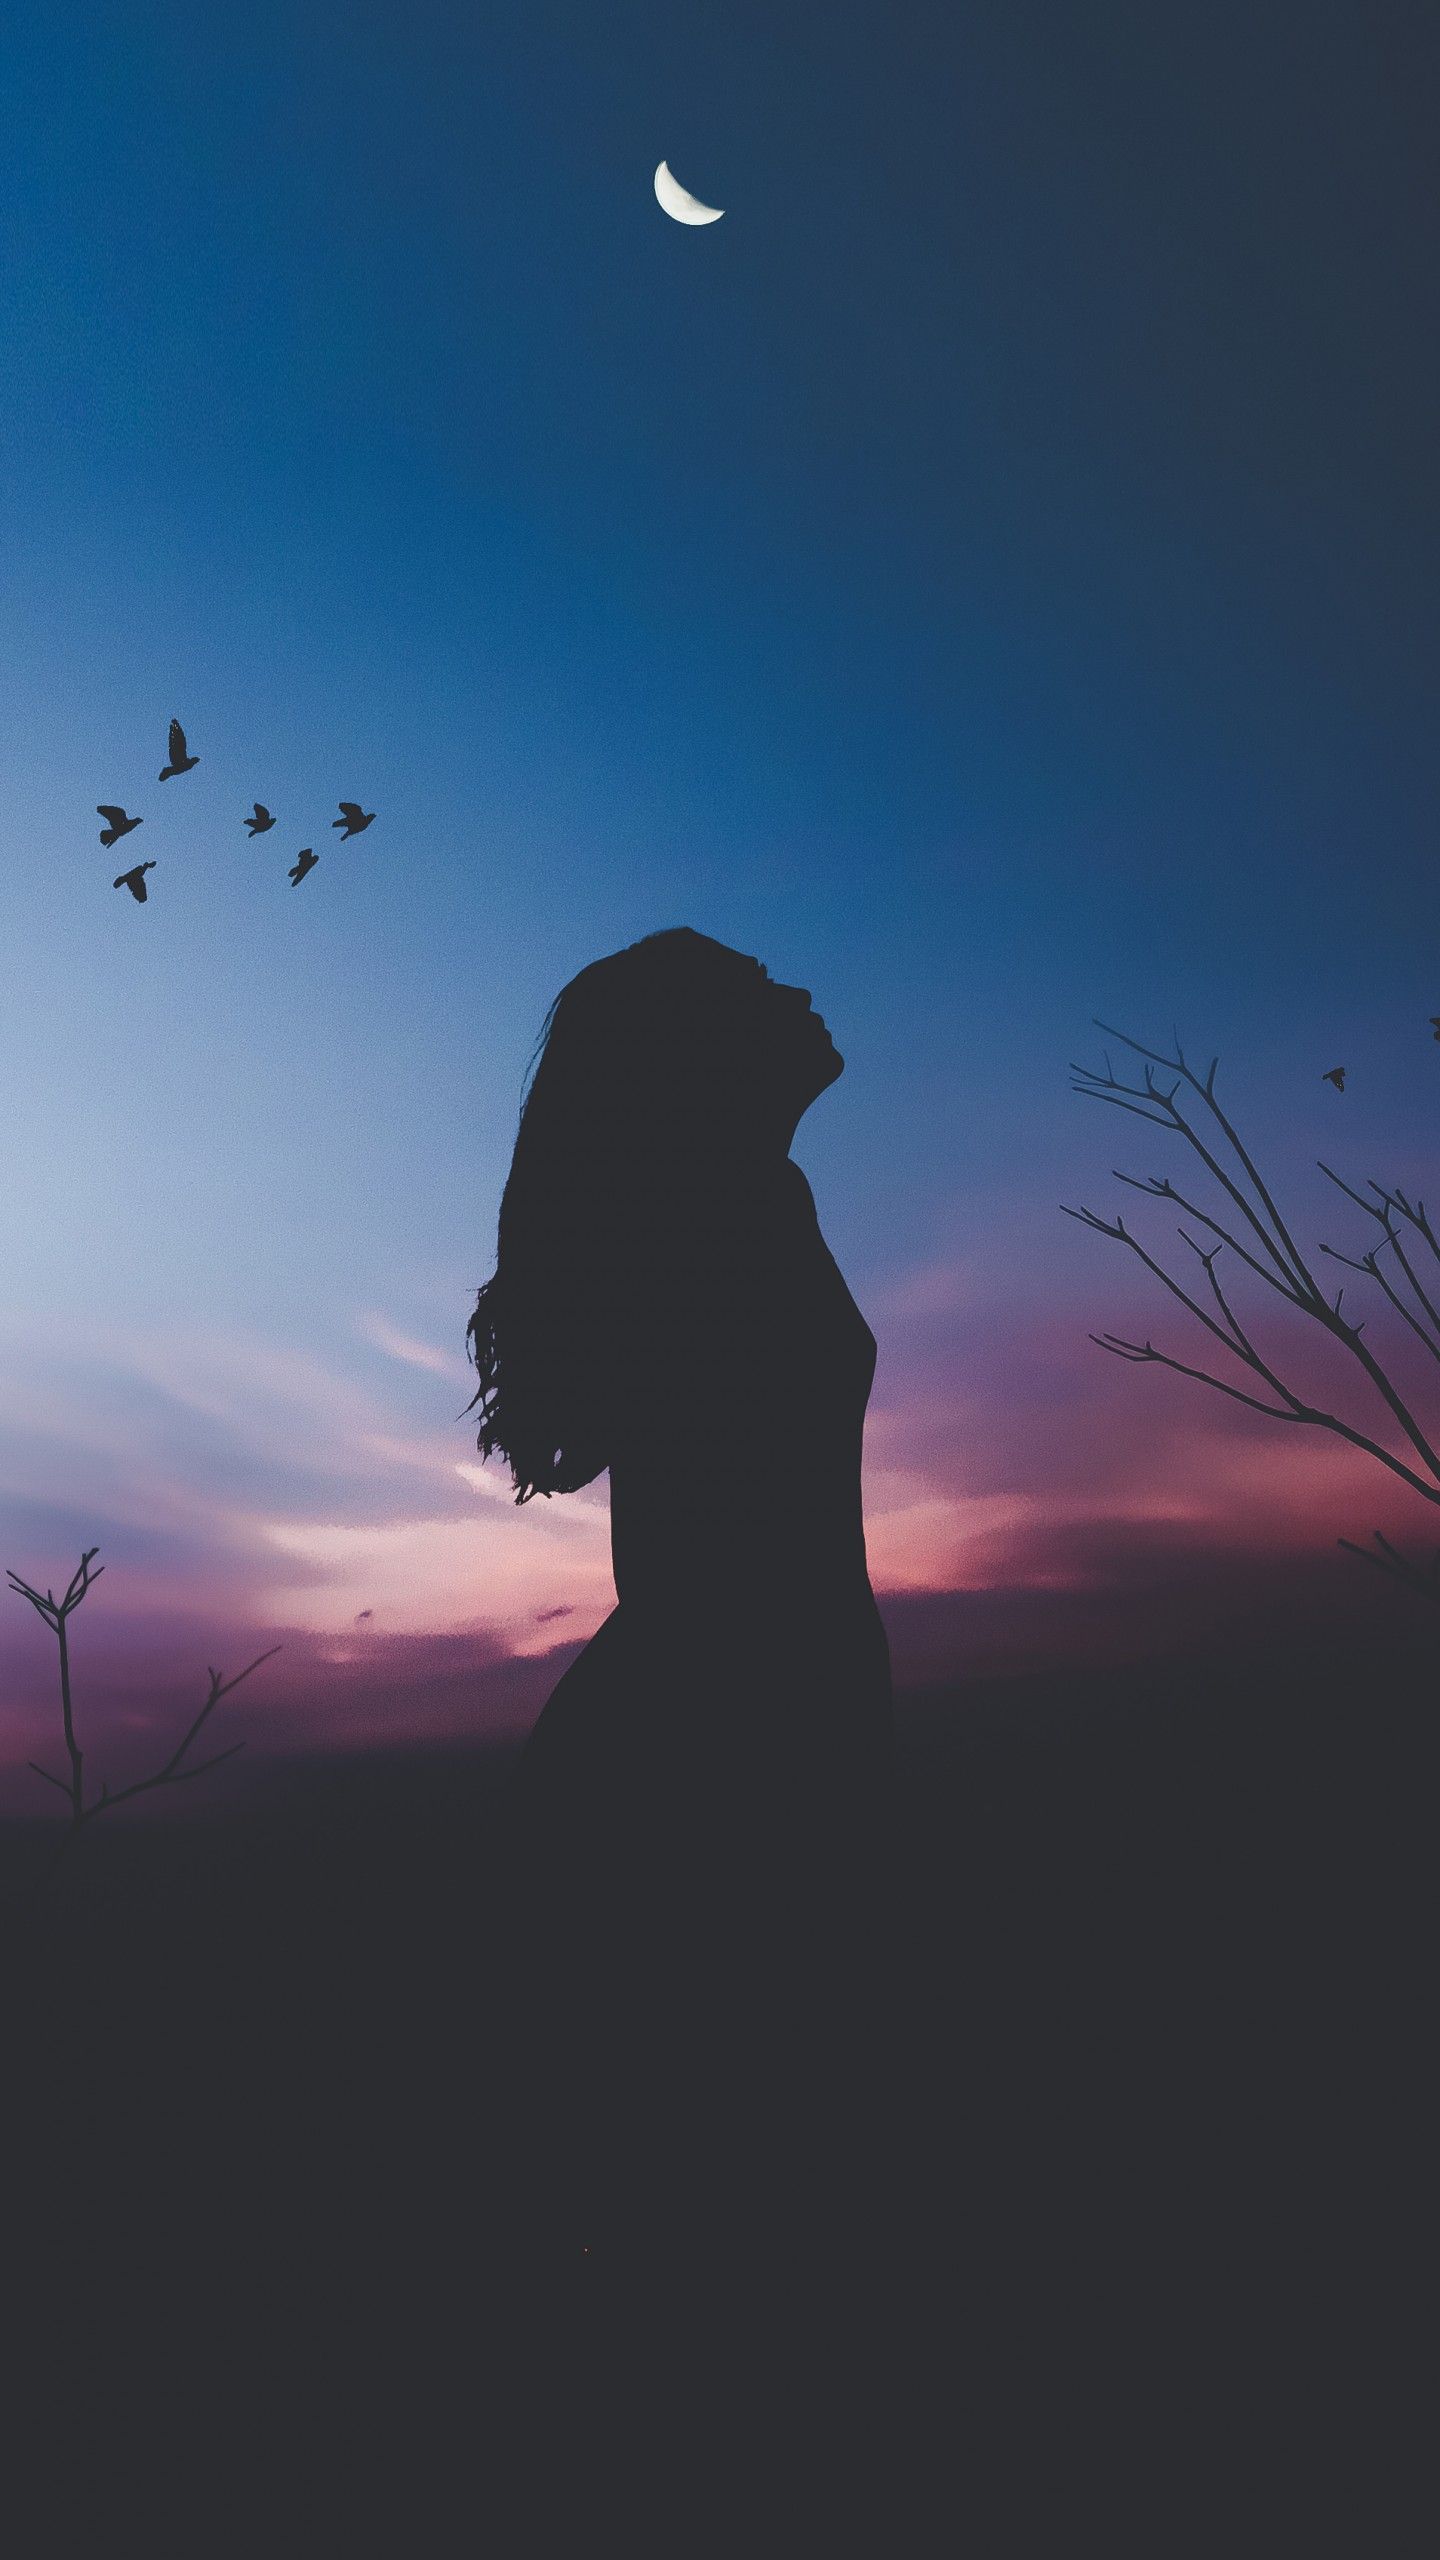 Wallpaper Alone, Woman, Birds, Silhouette, HD, Fantasy,. Wallpaper for iPhone, Android, Mobile and Desktop